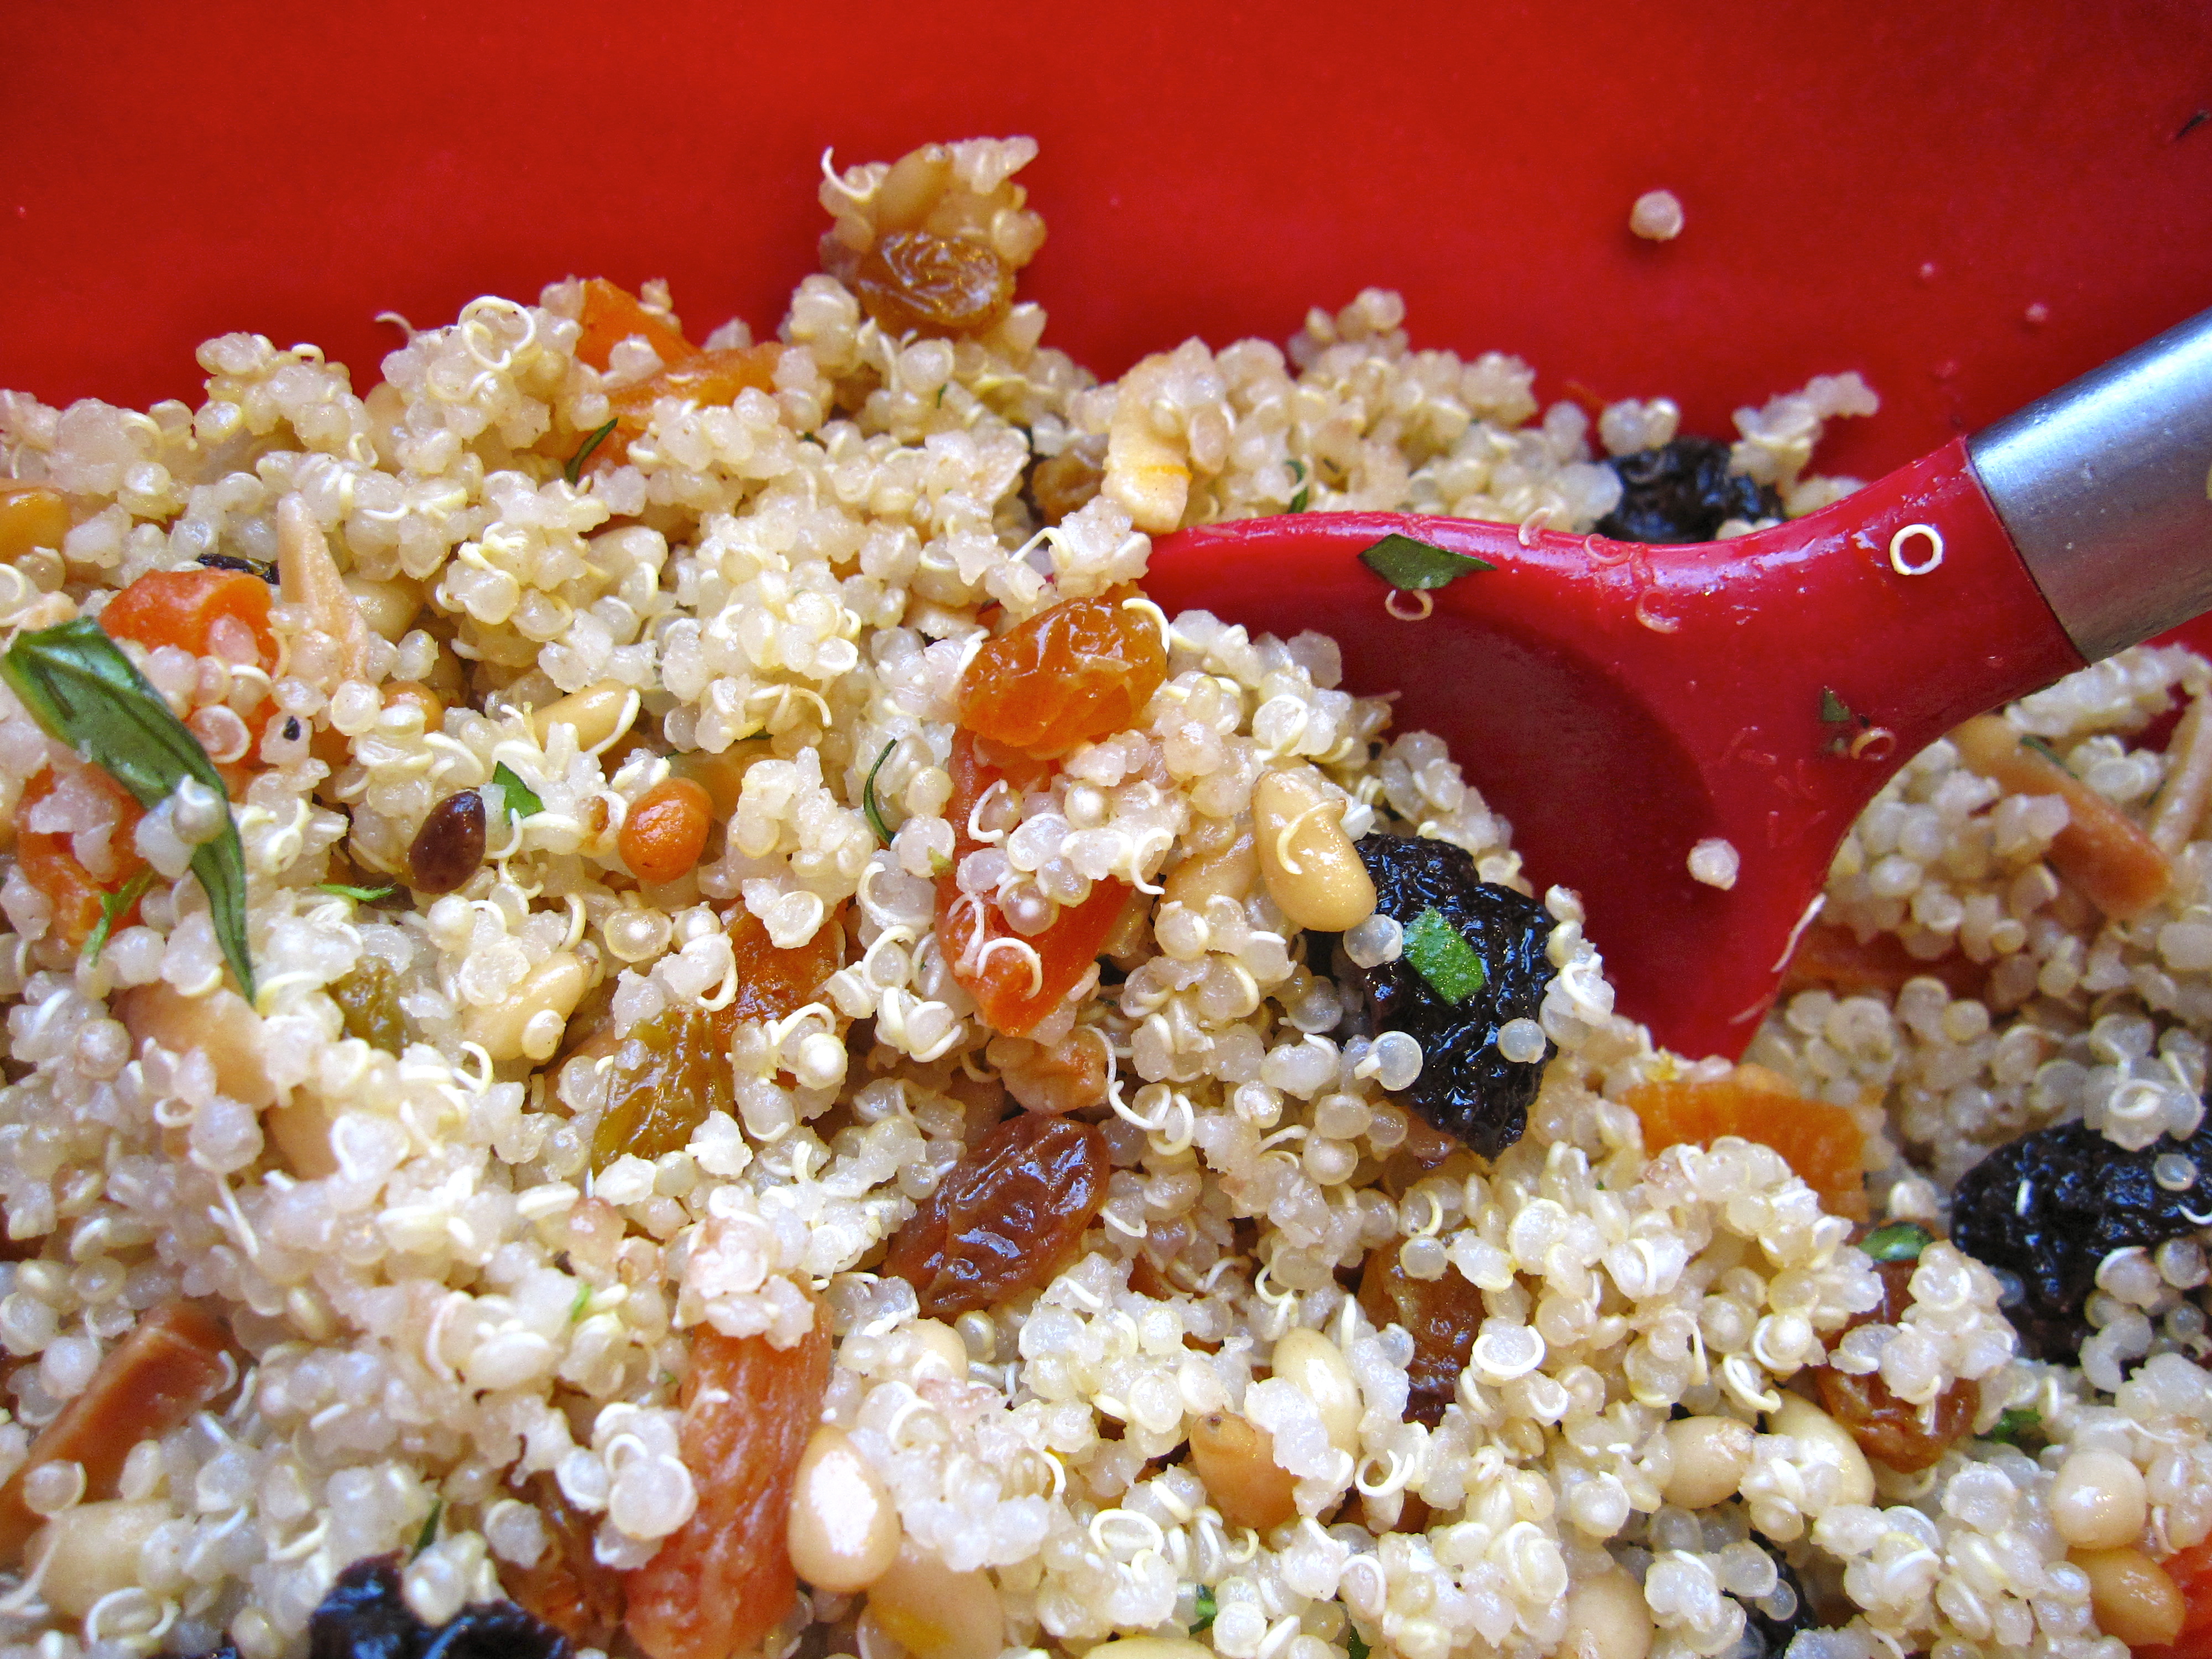 Dorie Greenspan's Quinoa, fruit, and nut salad with red spoon scooping up.